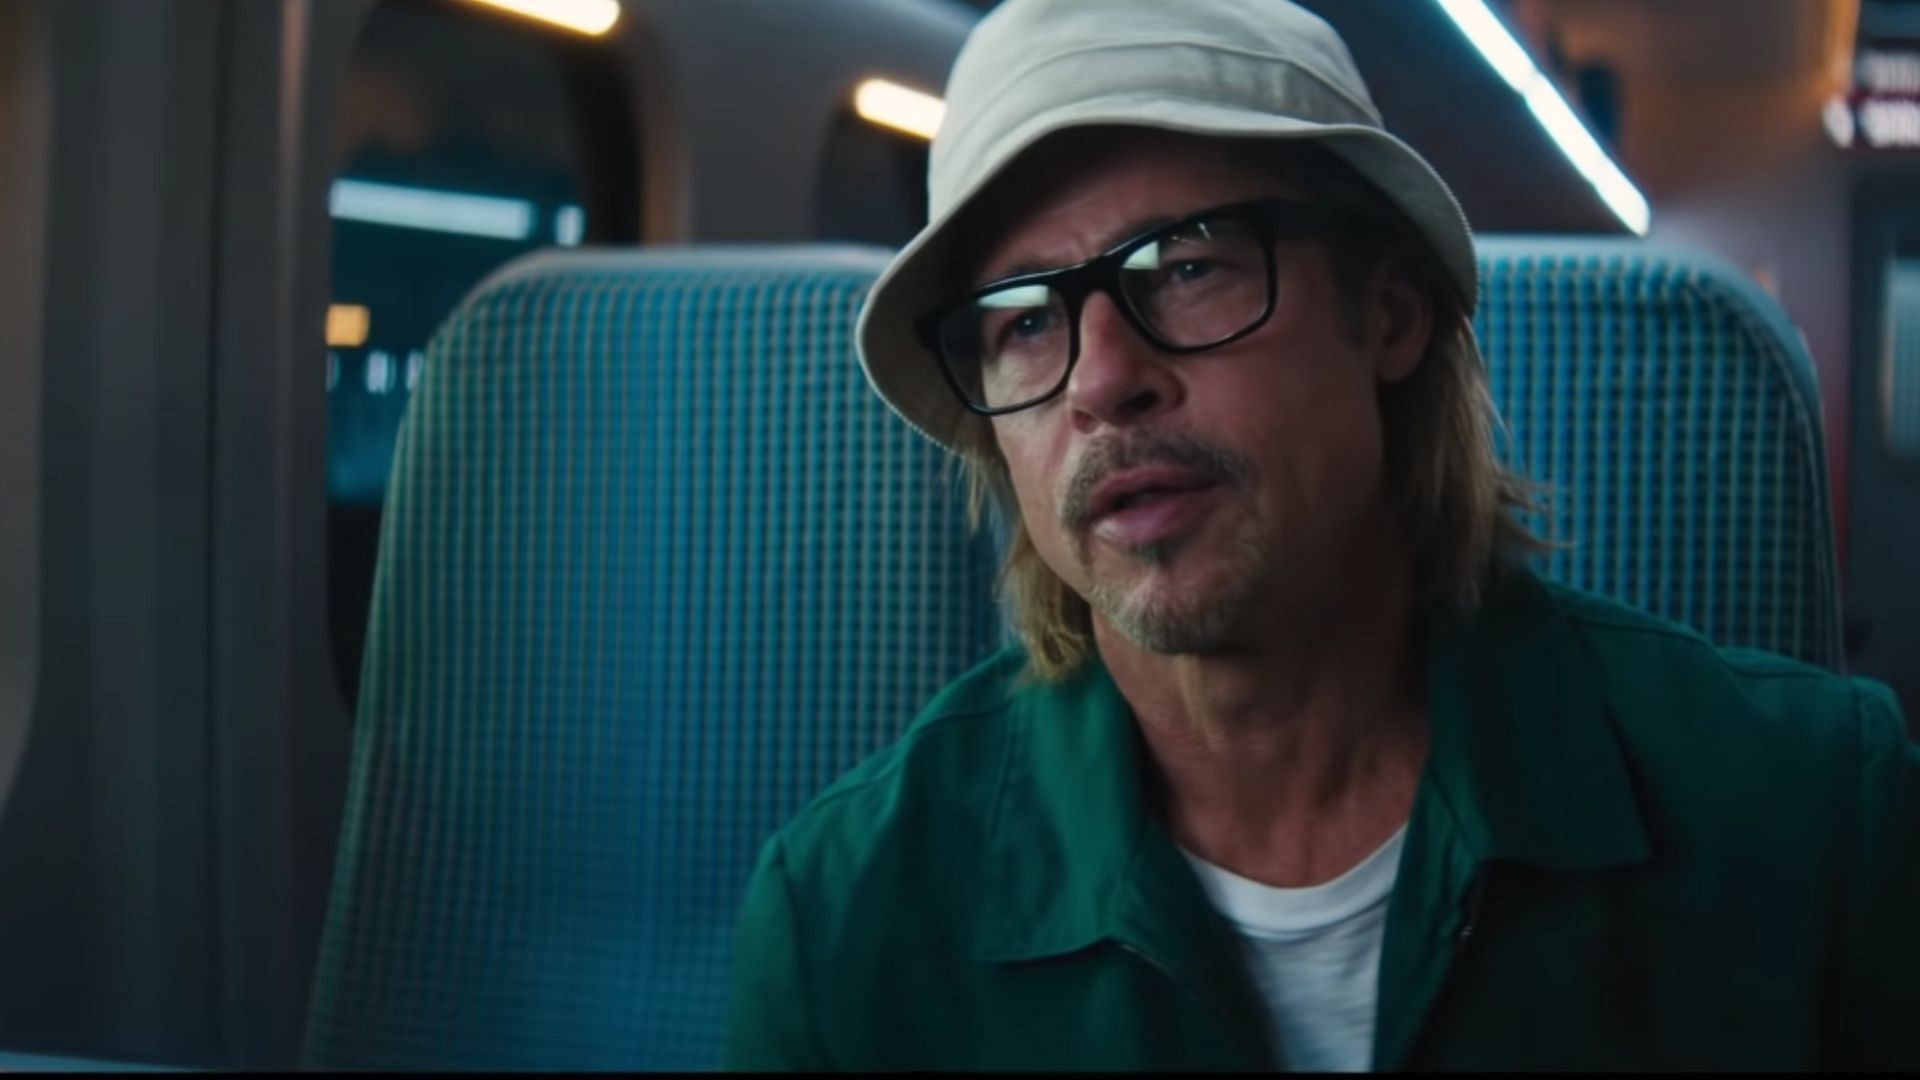 Brad Pitt's Bullet Train cast list includes Bad Bunny and others